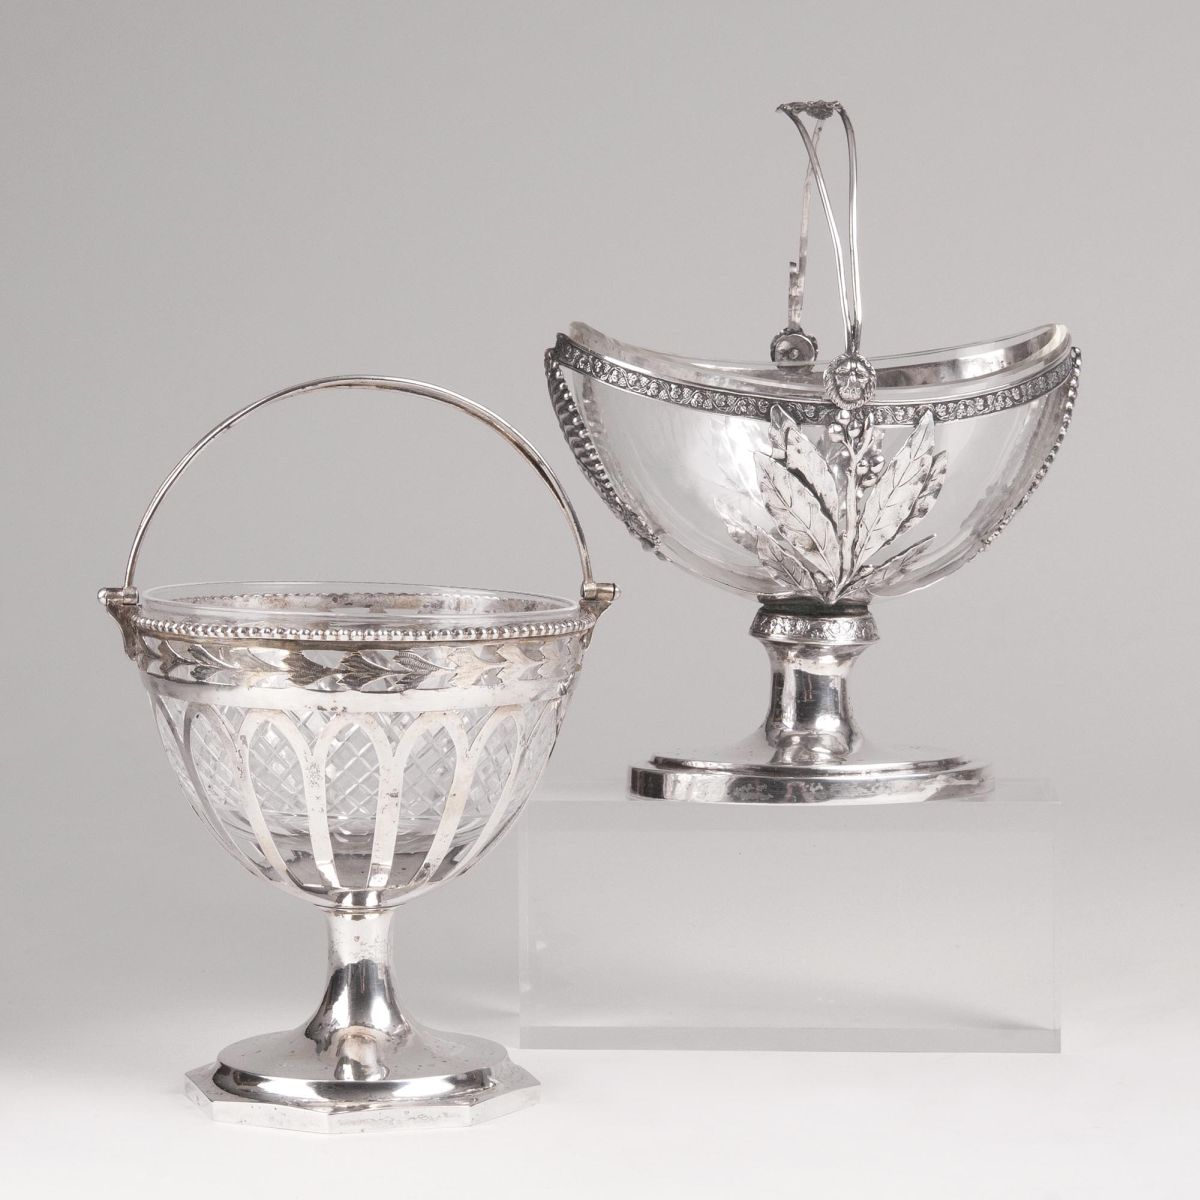 A Pair of Two Sugar Baskets